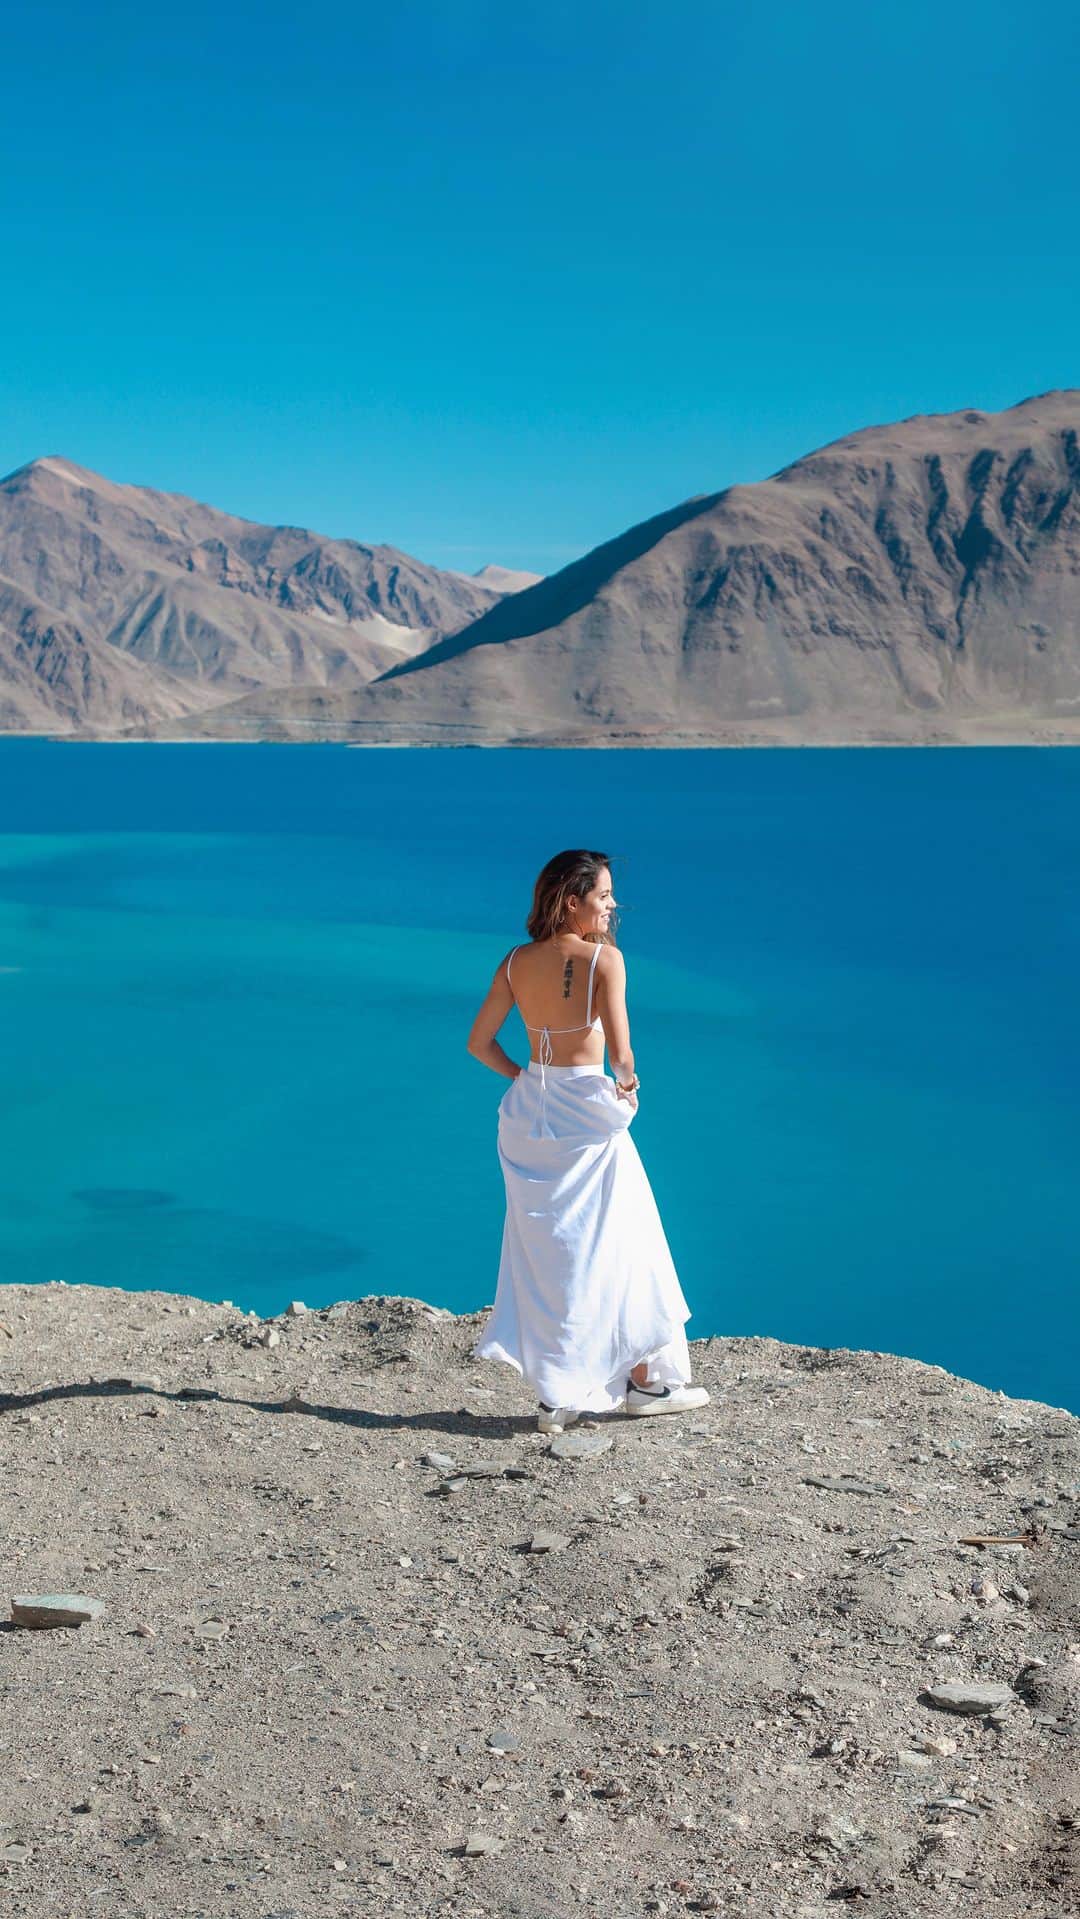 Aakriti Ranaのインスタグラム：「Had to drive the @landrover_in Defender at Pangong wearing a gorgeous white lehenga! This place truly looks unreal! Such a vibe🔥   📸 Shot by @vikrantdate @advait_bartakke   #DefenderJourneys @Cougar__Motorsport #CougarMotorsport #partnership #aakritirana #landroverdefender #defender #pangonglake #pangongtso #incredibleindia #travelblogger #indiantravelblogger #lehenga #indianoutfit #reelsindia」